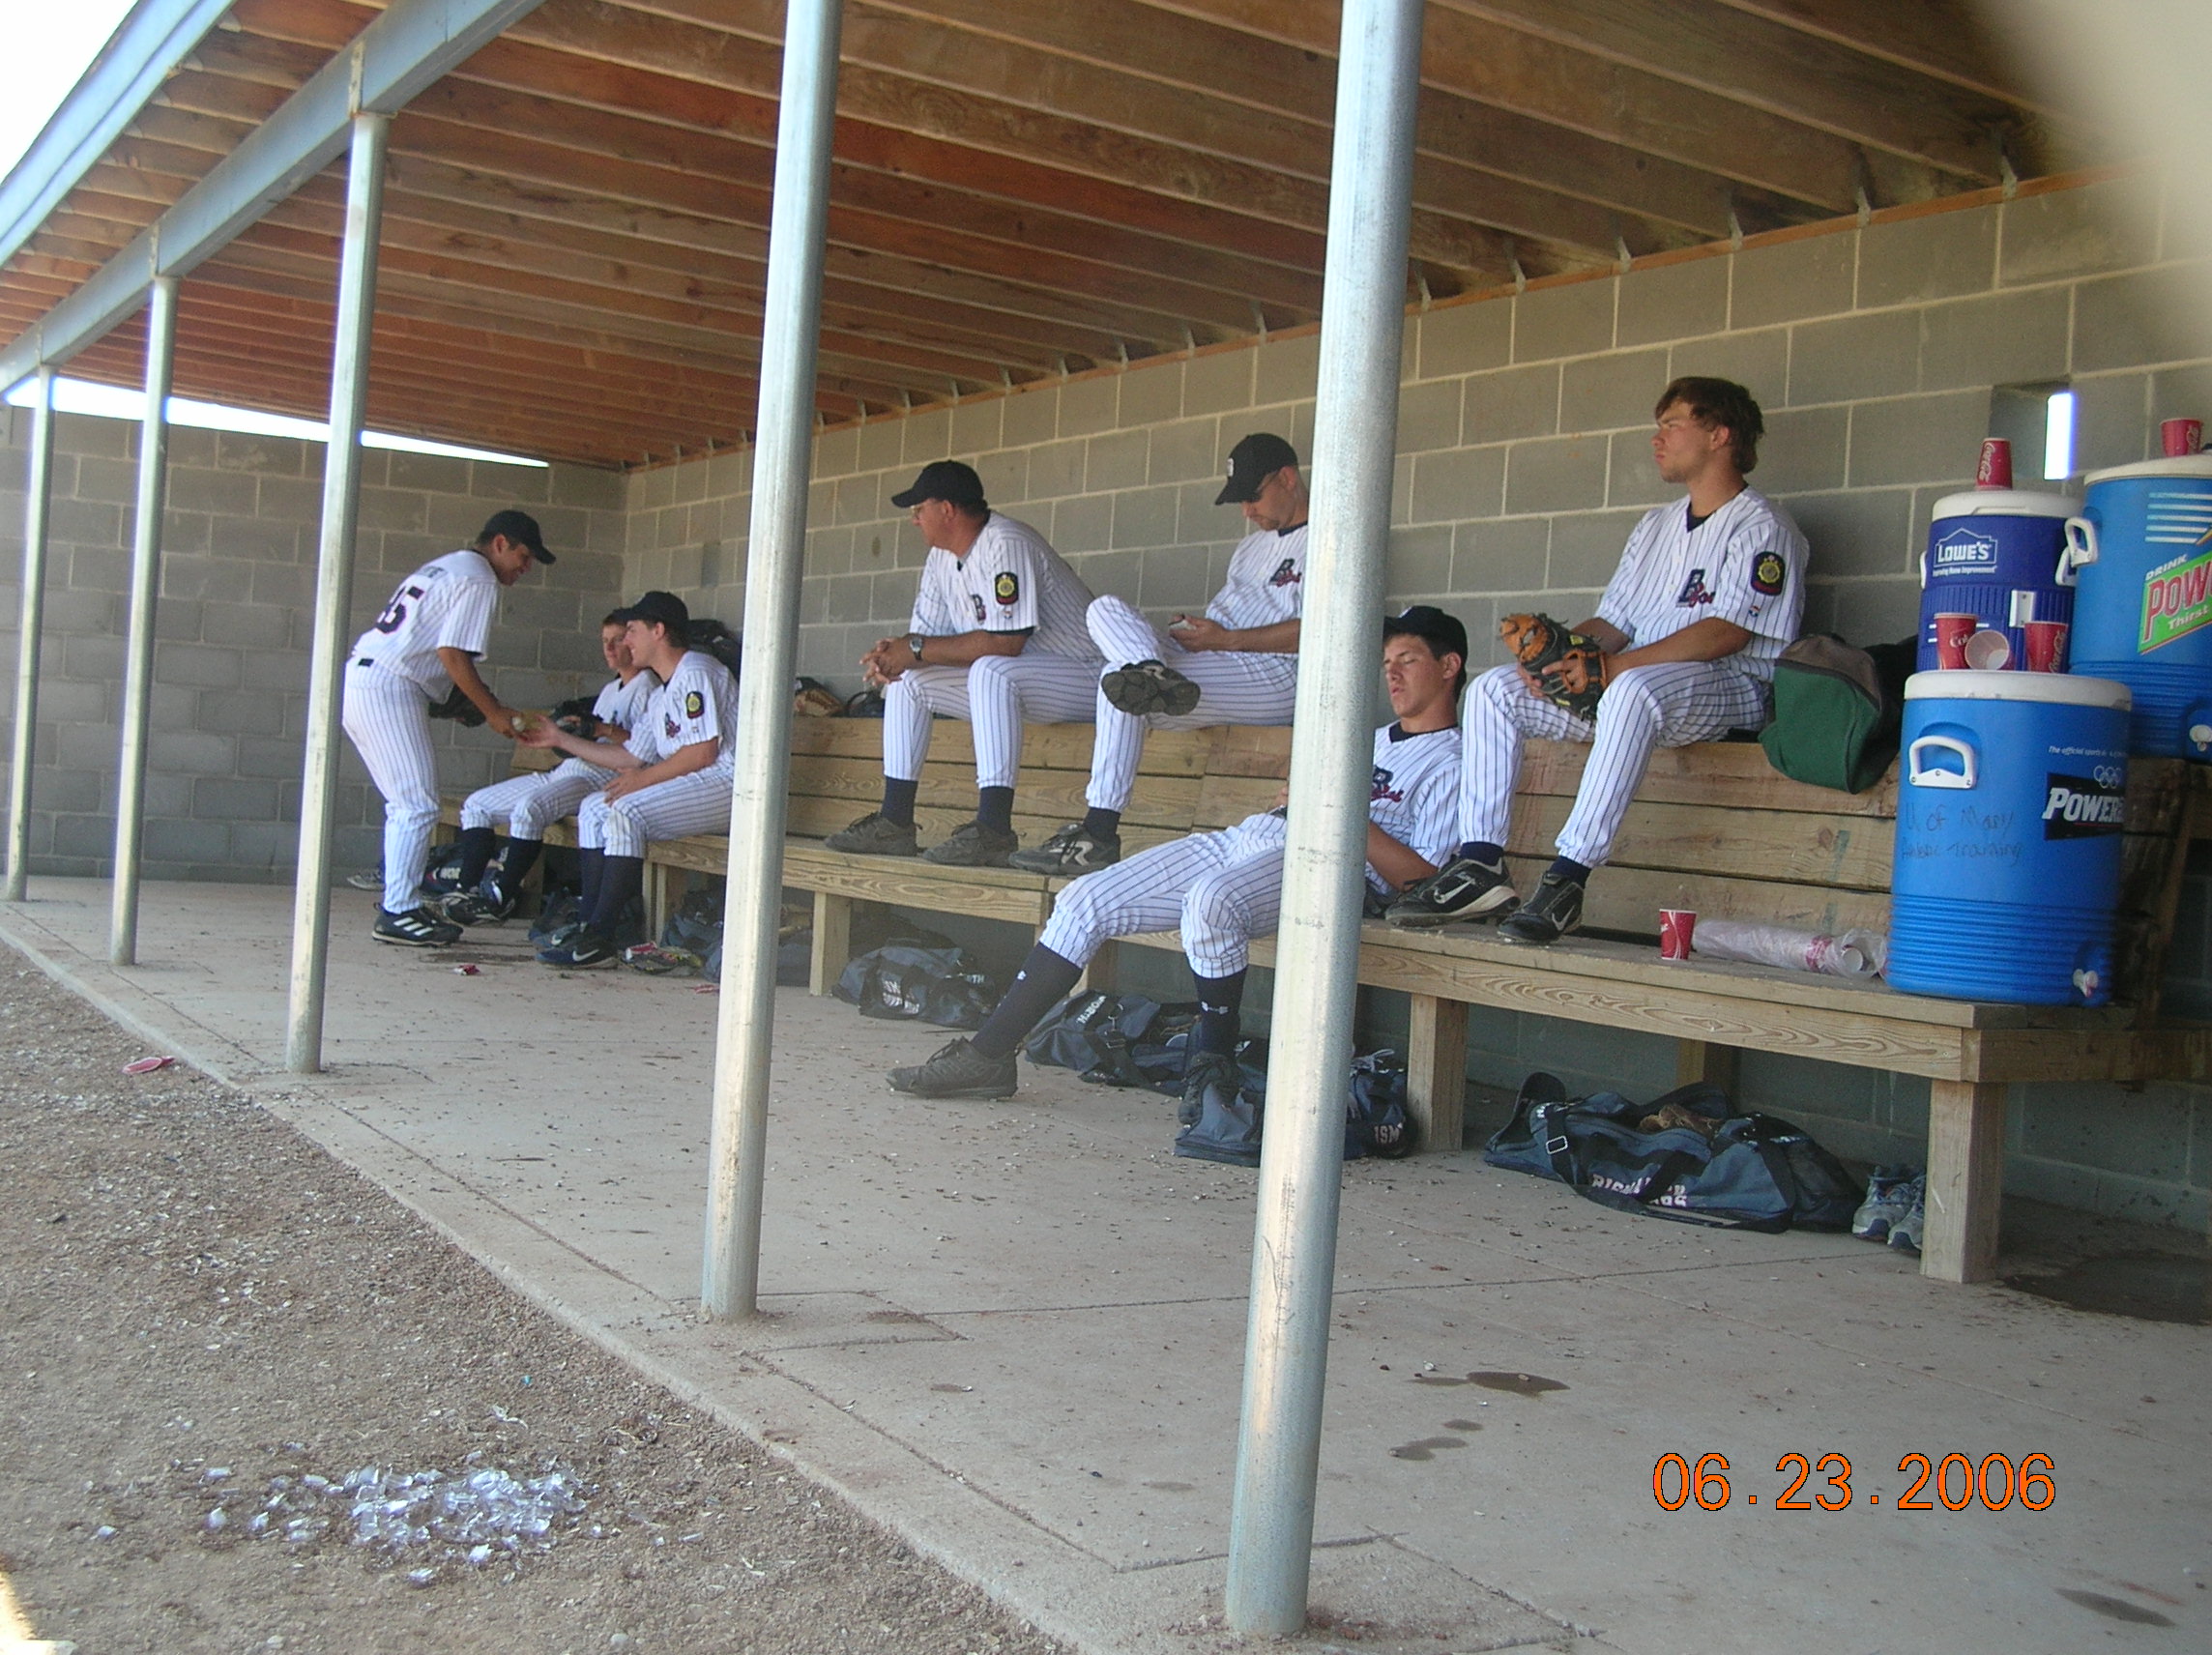 The dugout